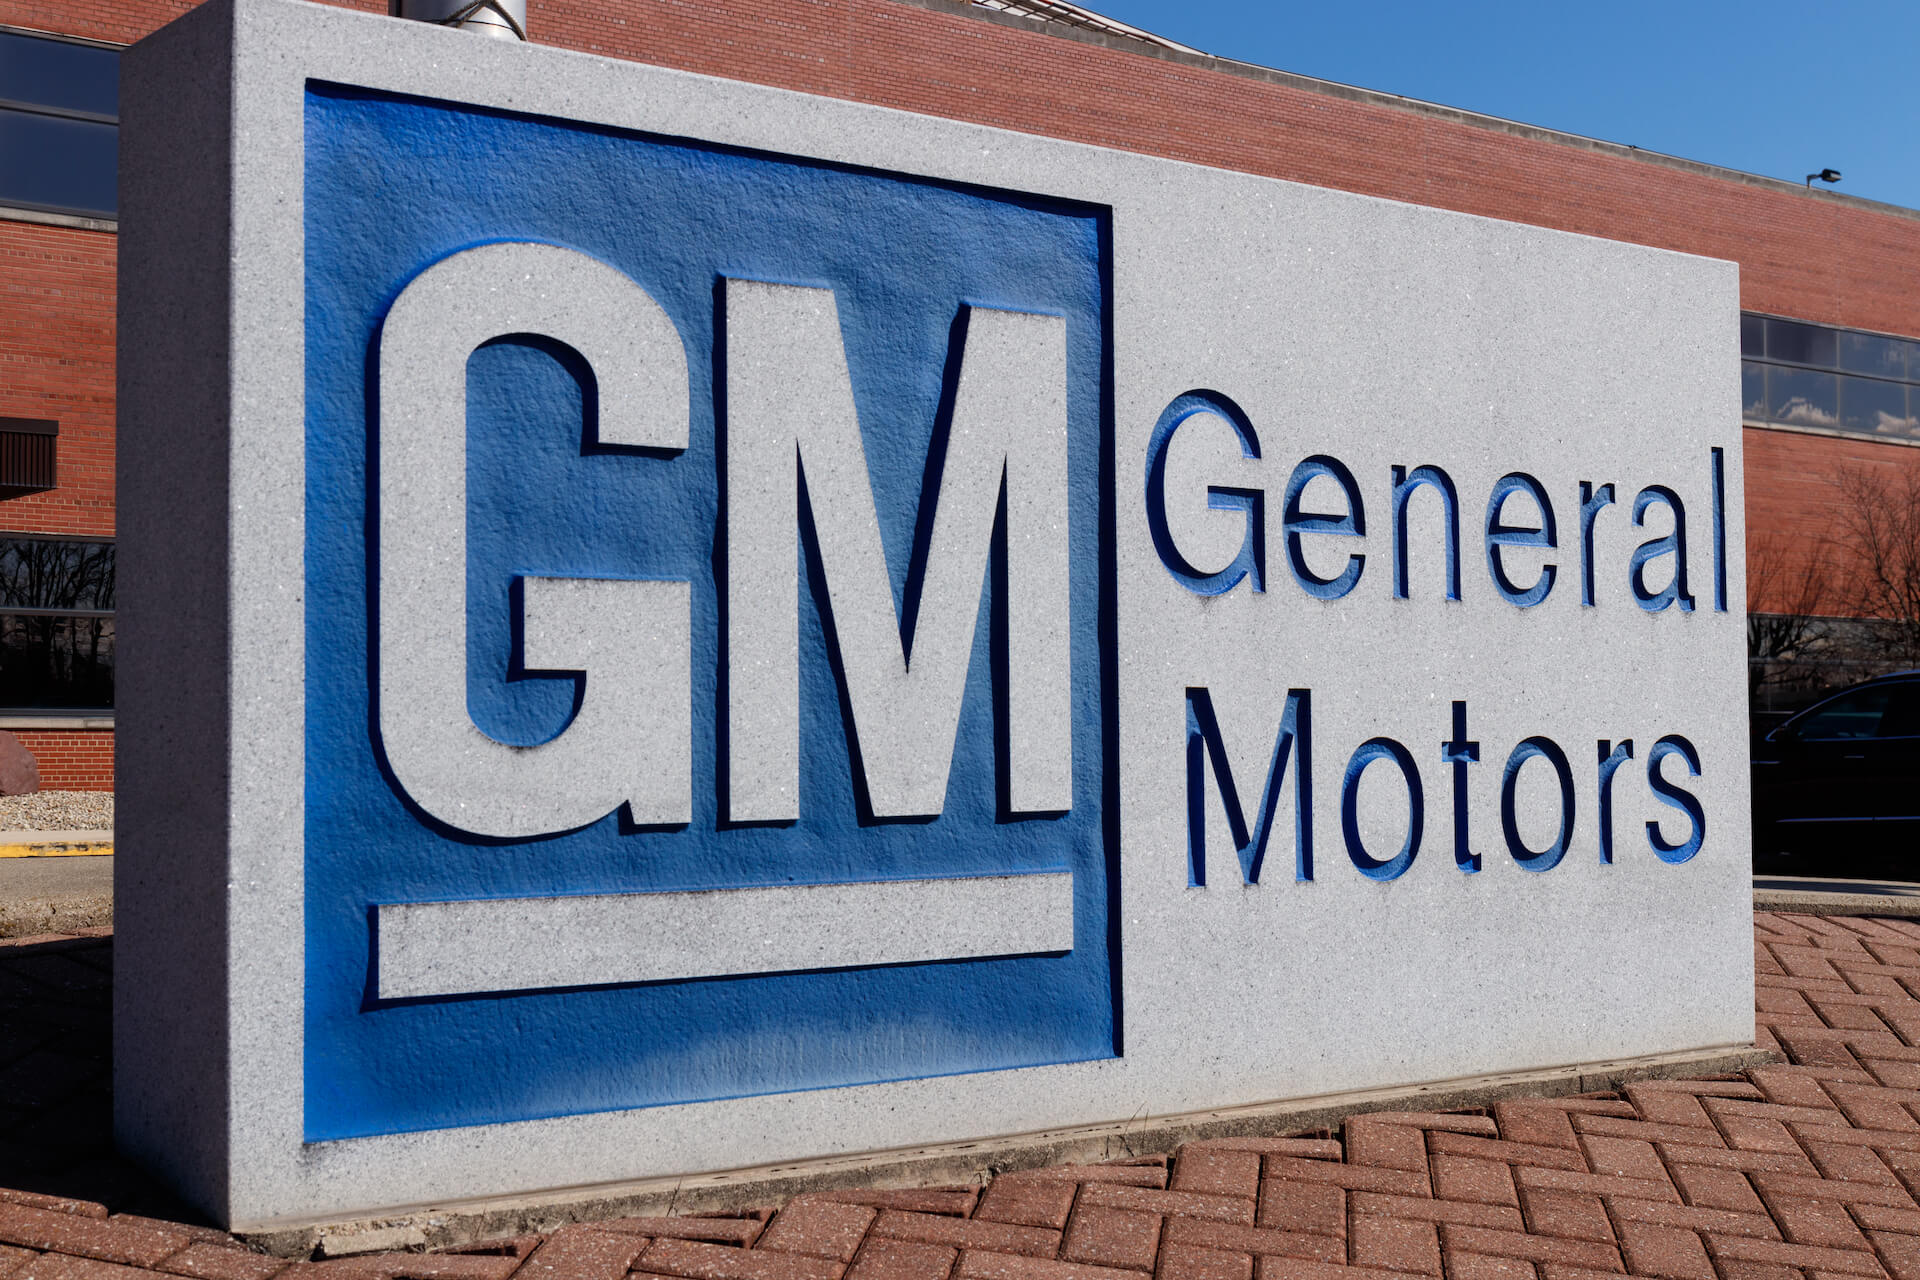  General Motors Expands Fuel Cell Business With New Applications 